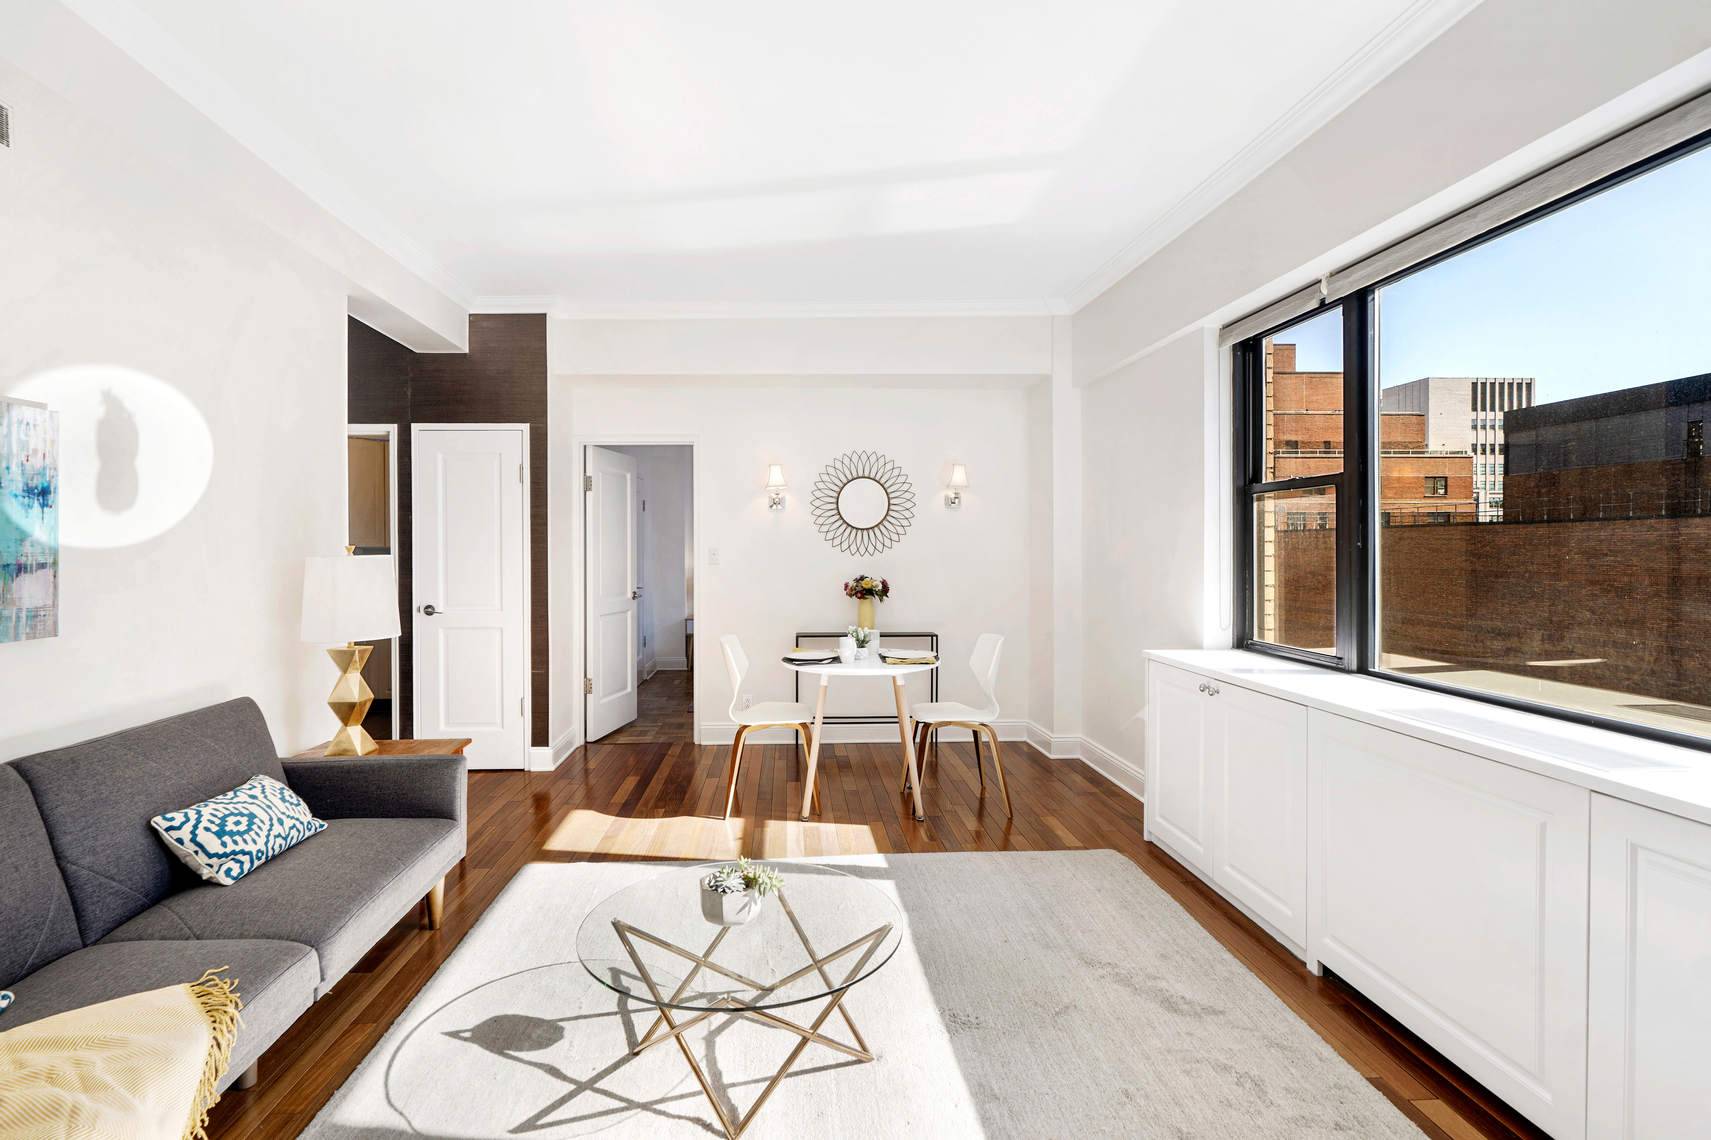 Perfectly perched at 7 Park Avenue is this sun blasted turnkey one bedroom apartment.